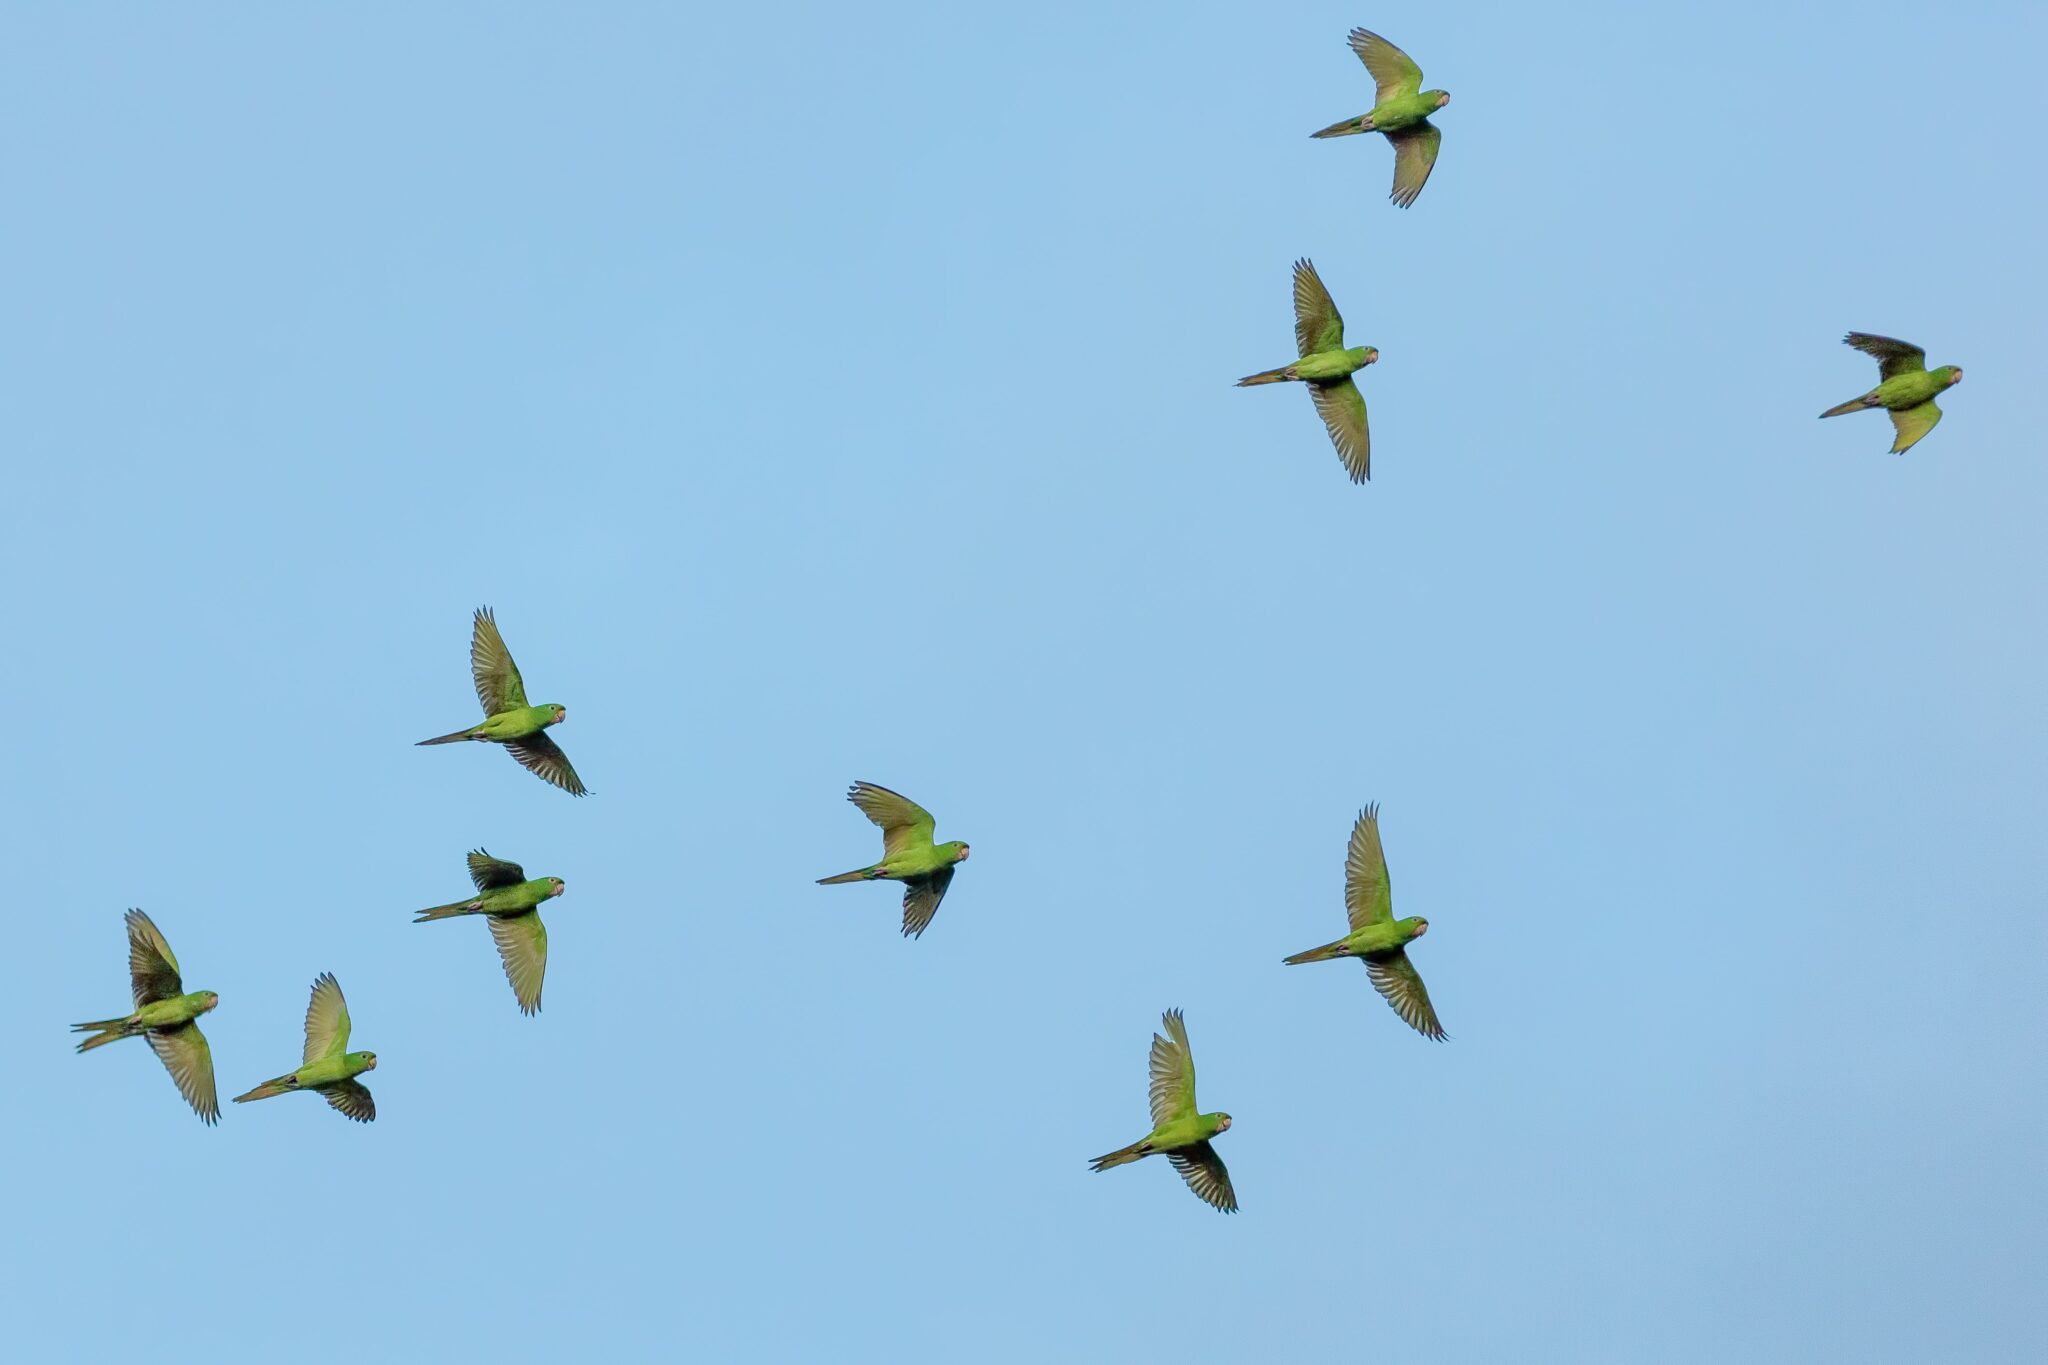 A stock photo of birds flying in Chiapas, a southern state in Mexico, where you will need to find a good legal firm to provide legal services if you are planning to invest